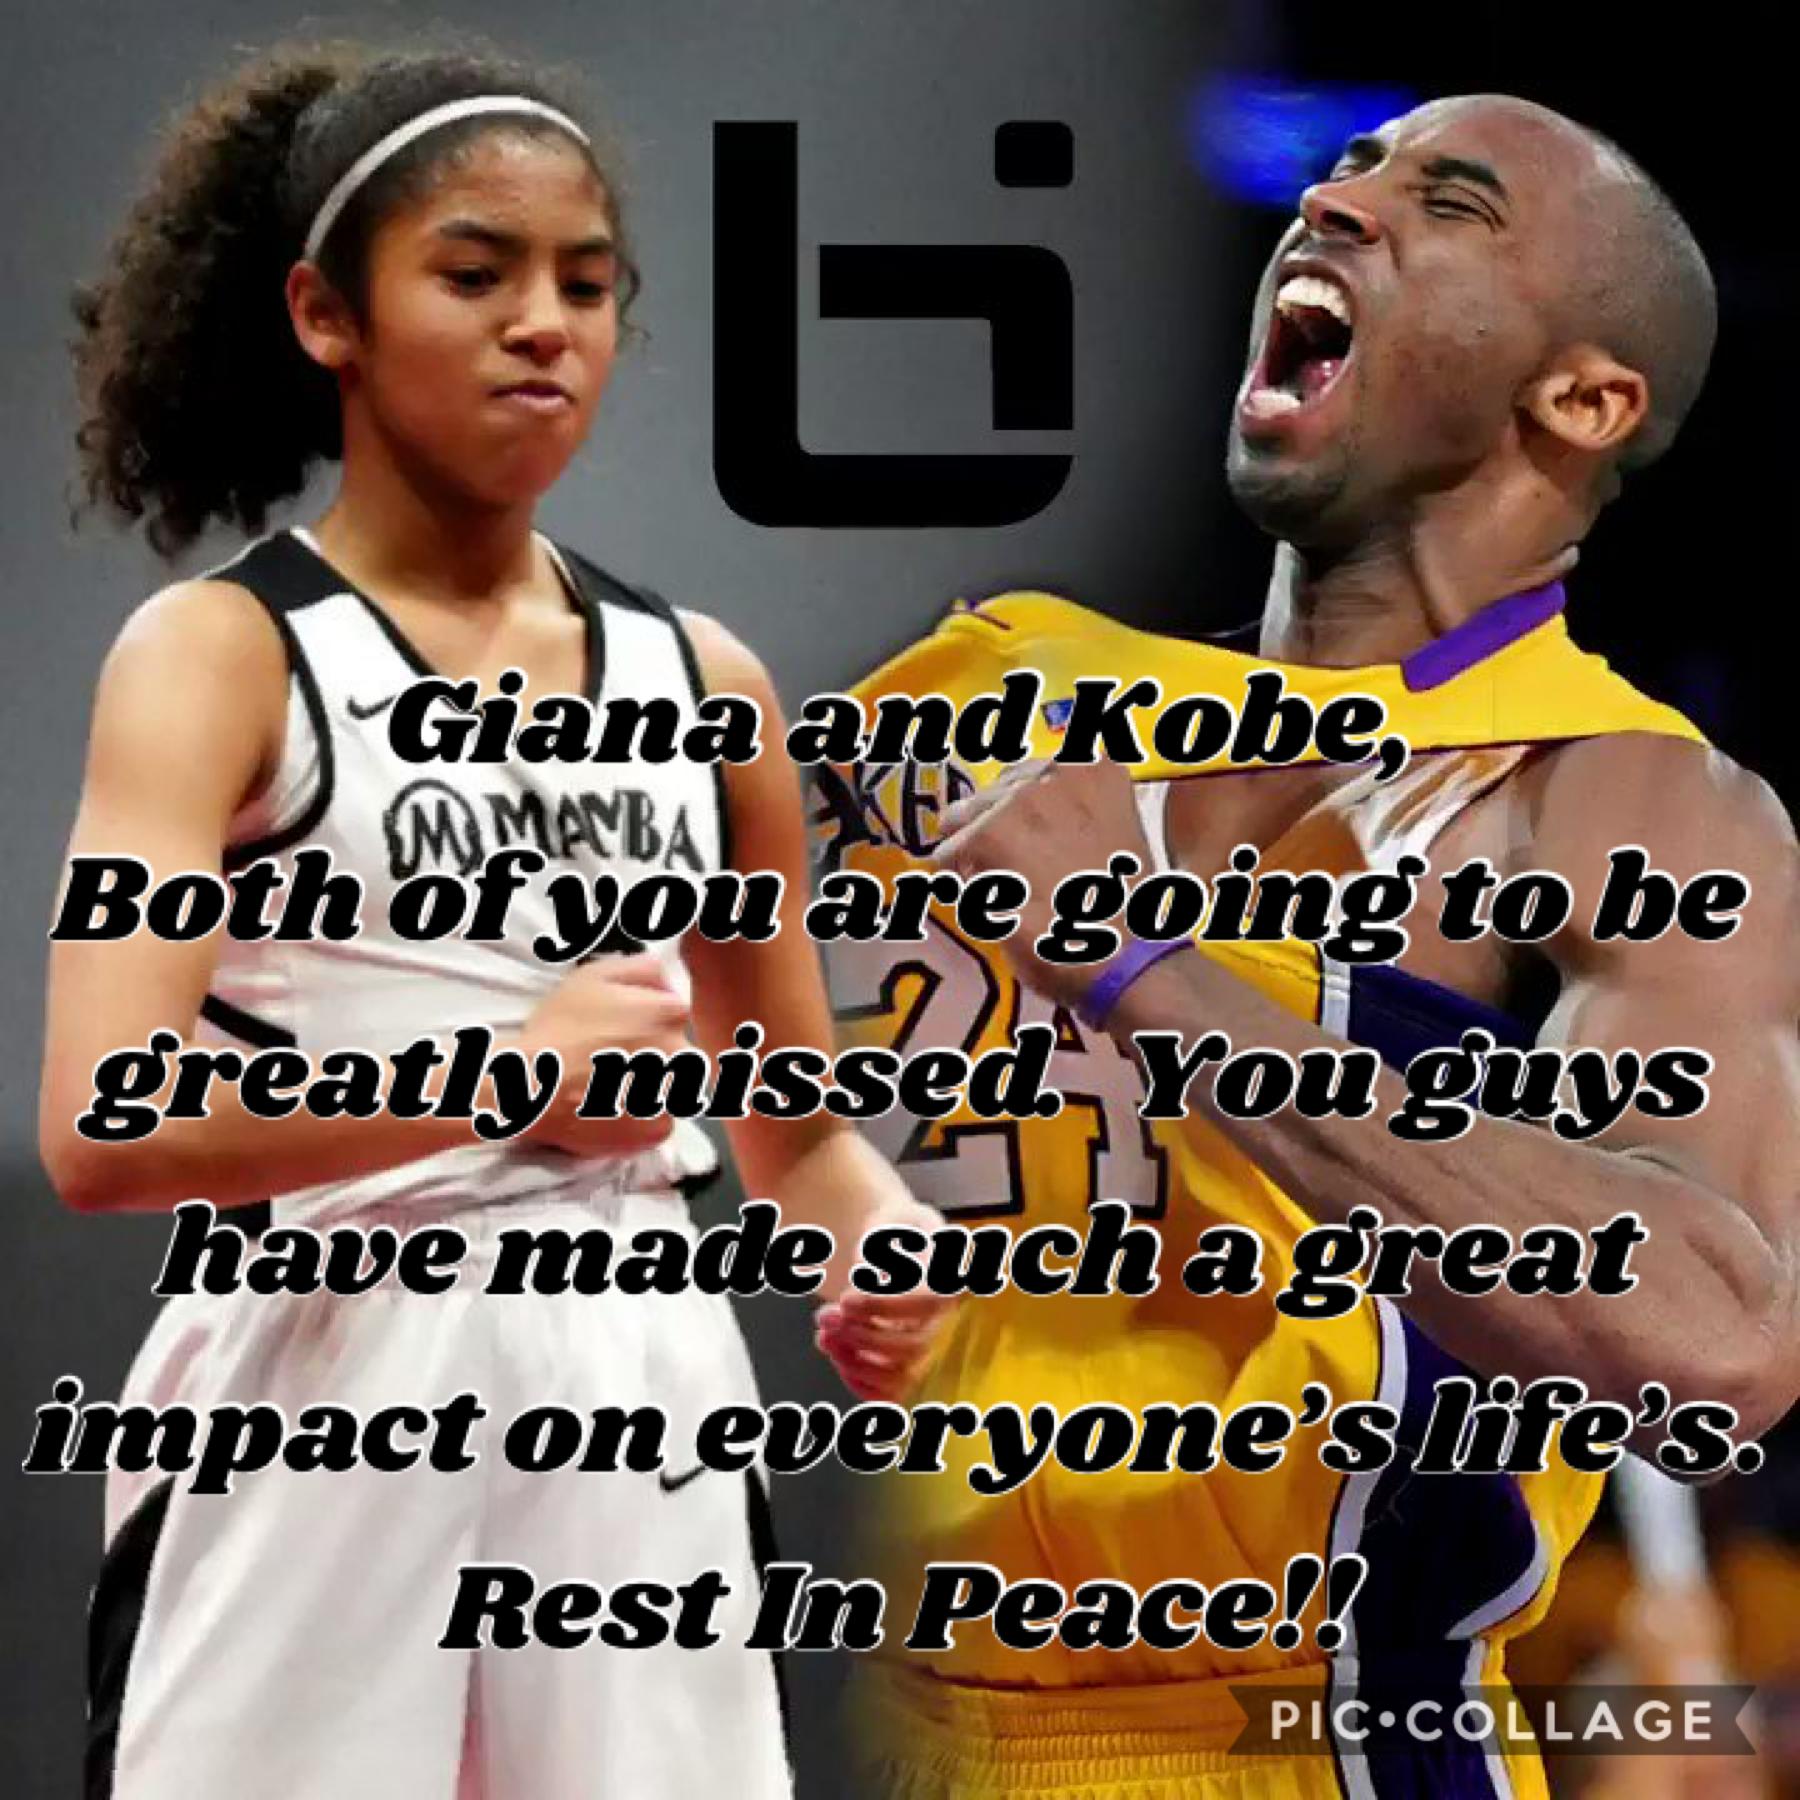 Rest In Peace!!🕊